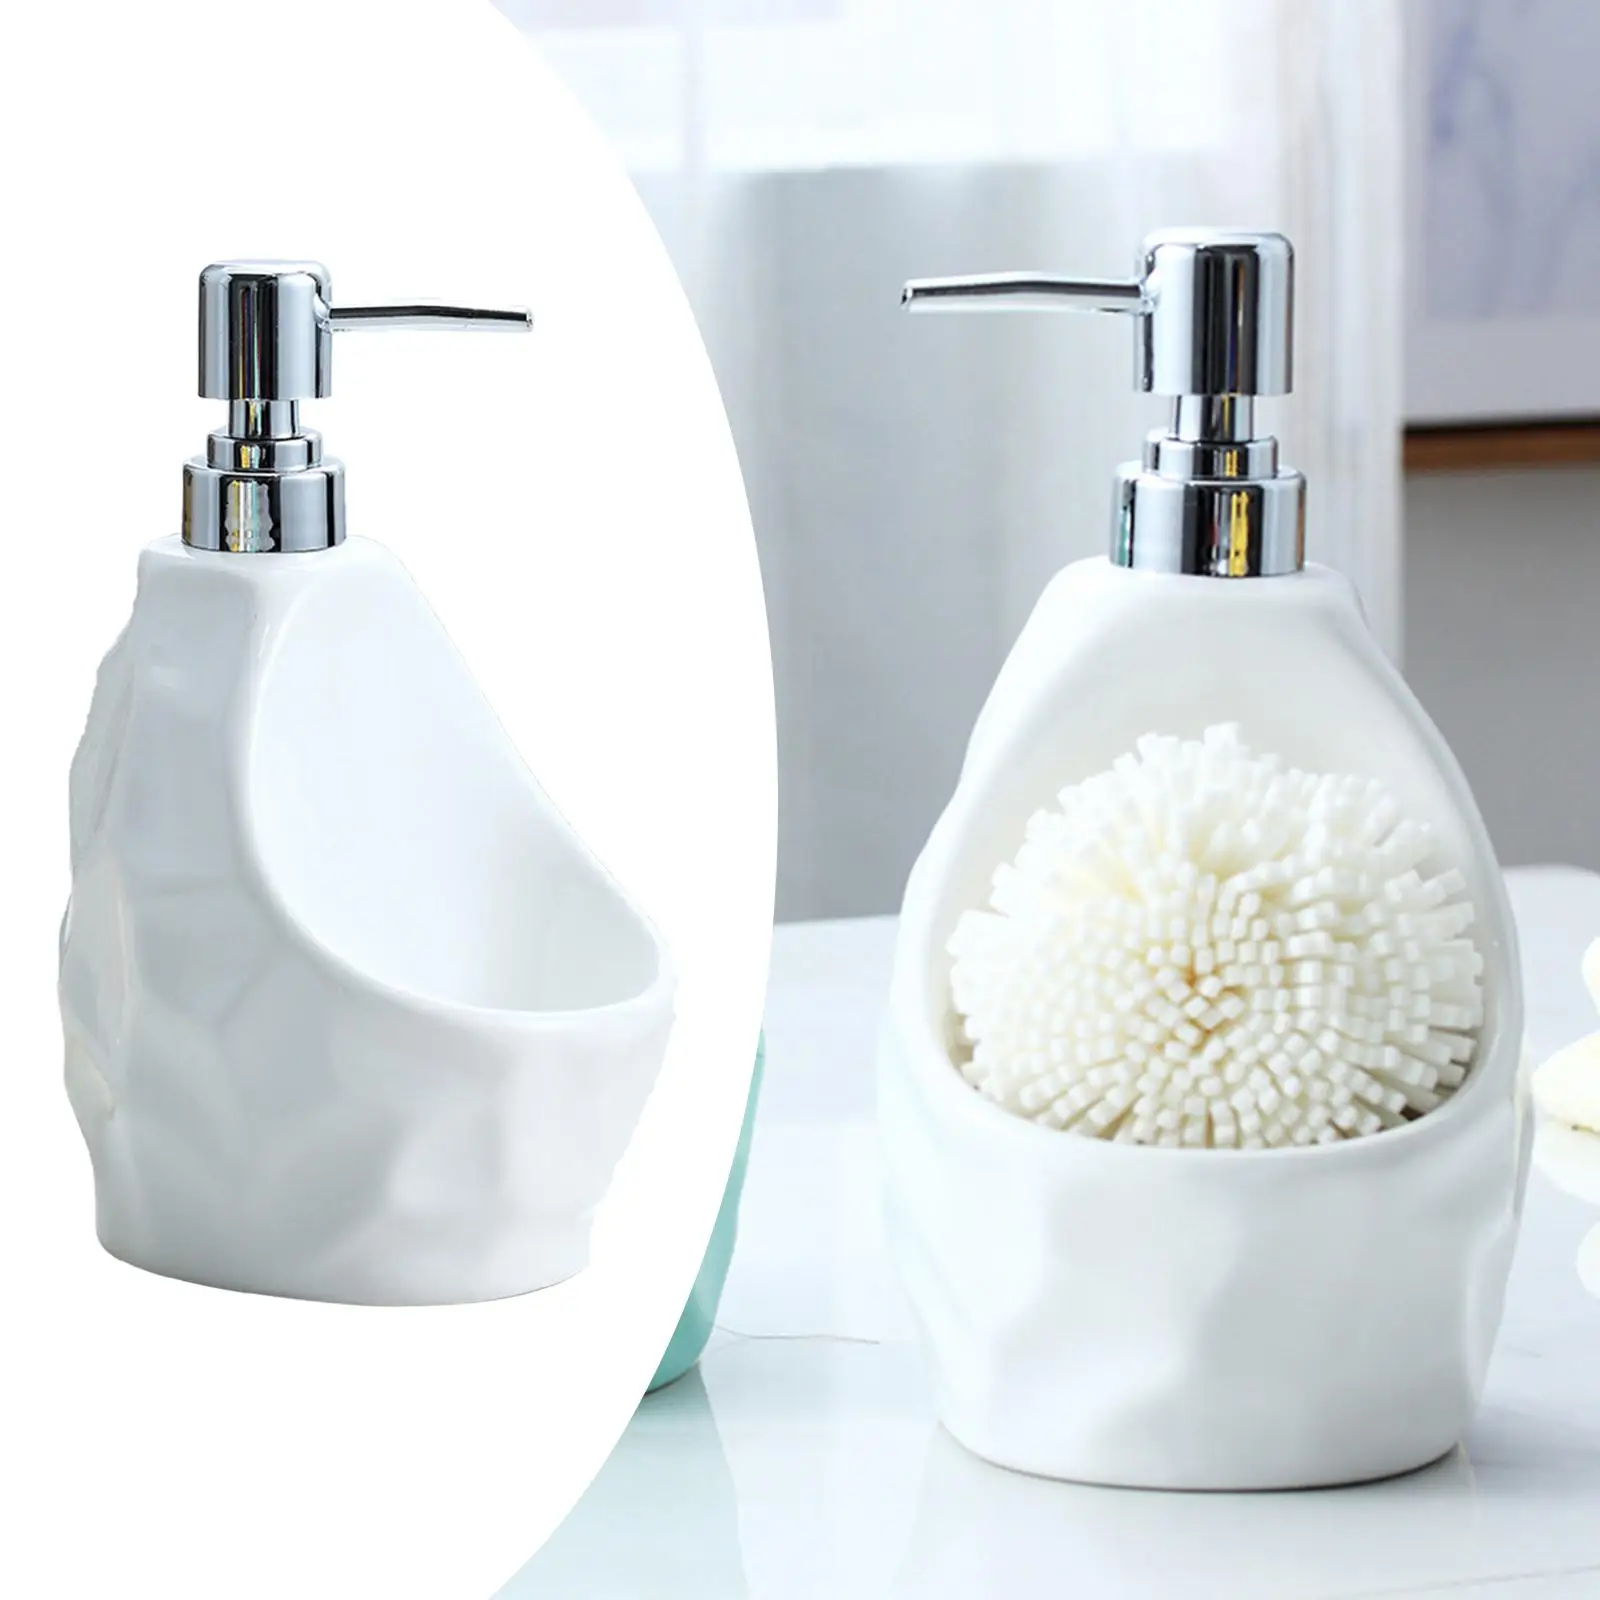 650ml Soap Dispenser Holds Stores Sponges Scrubbers Brushes Lotion Dispensers Empty Container for Soap Bathroom shampoo